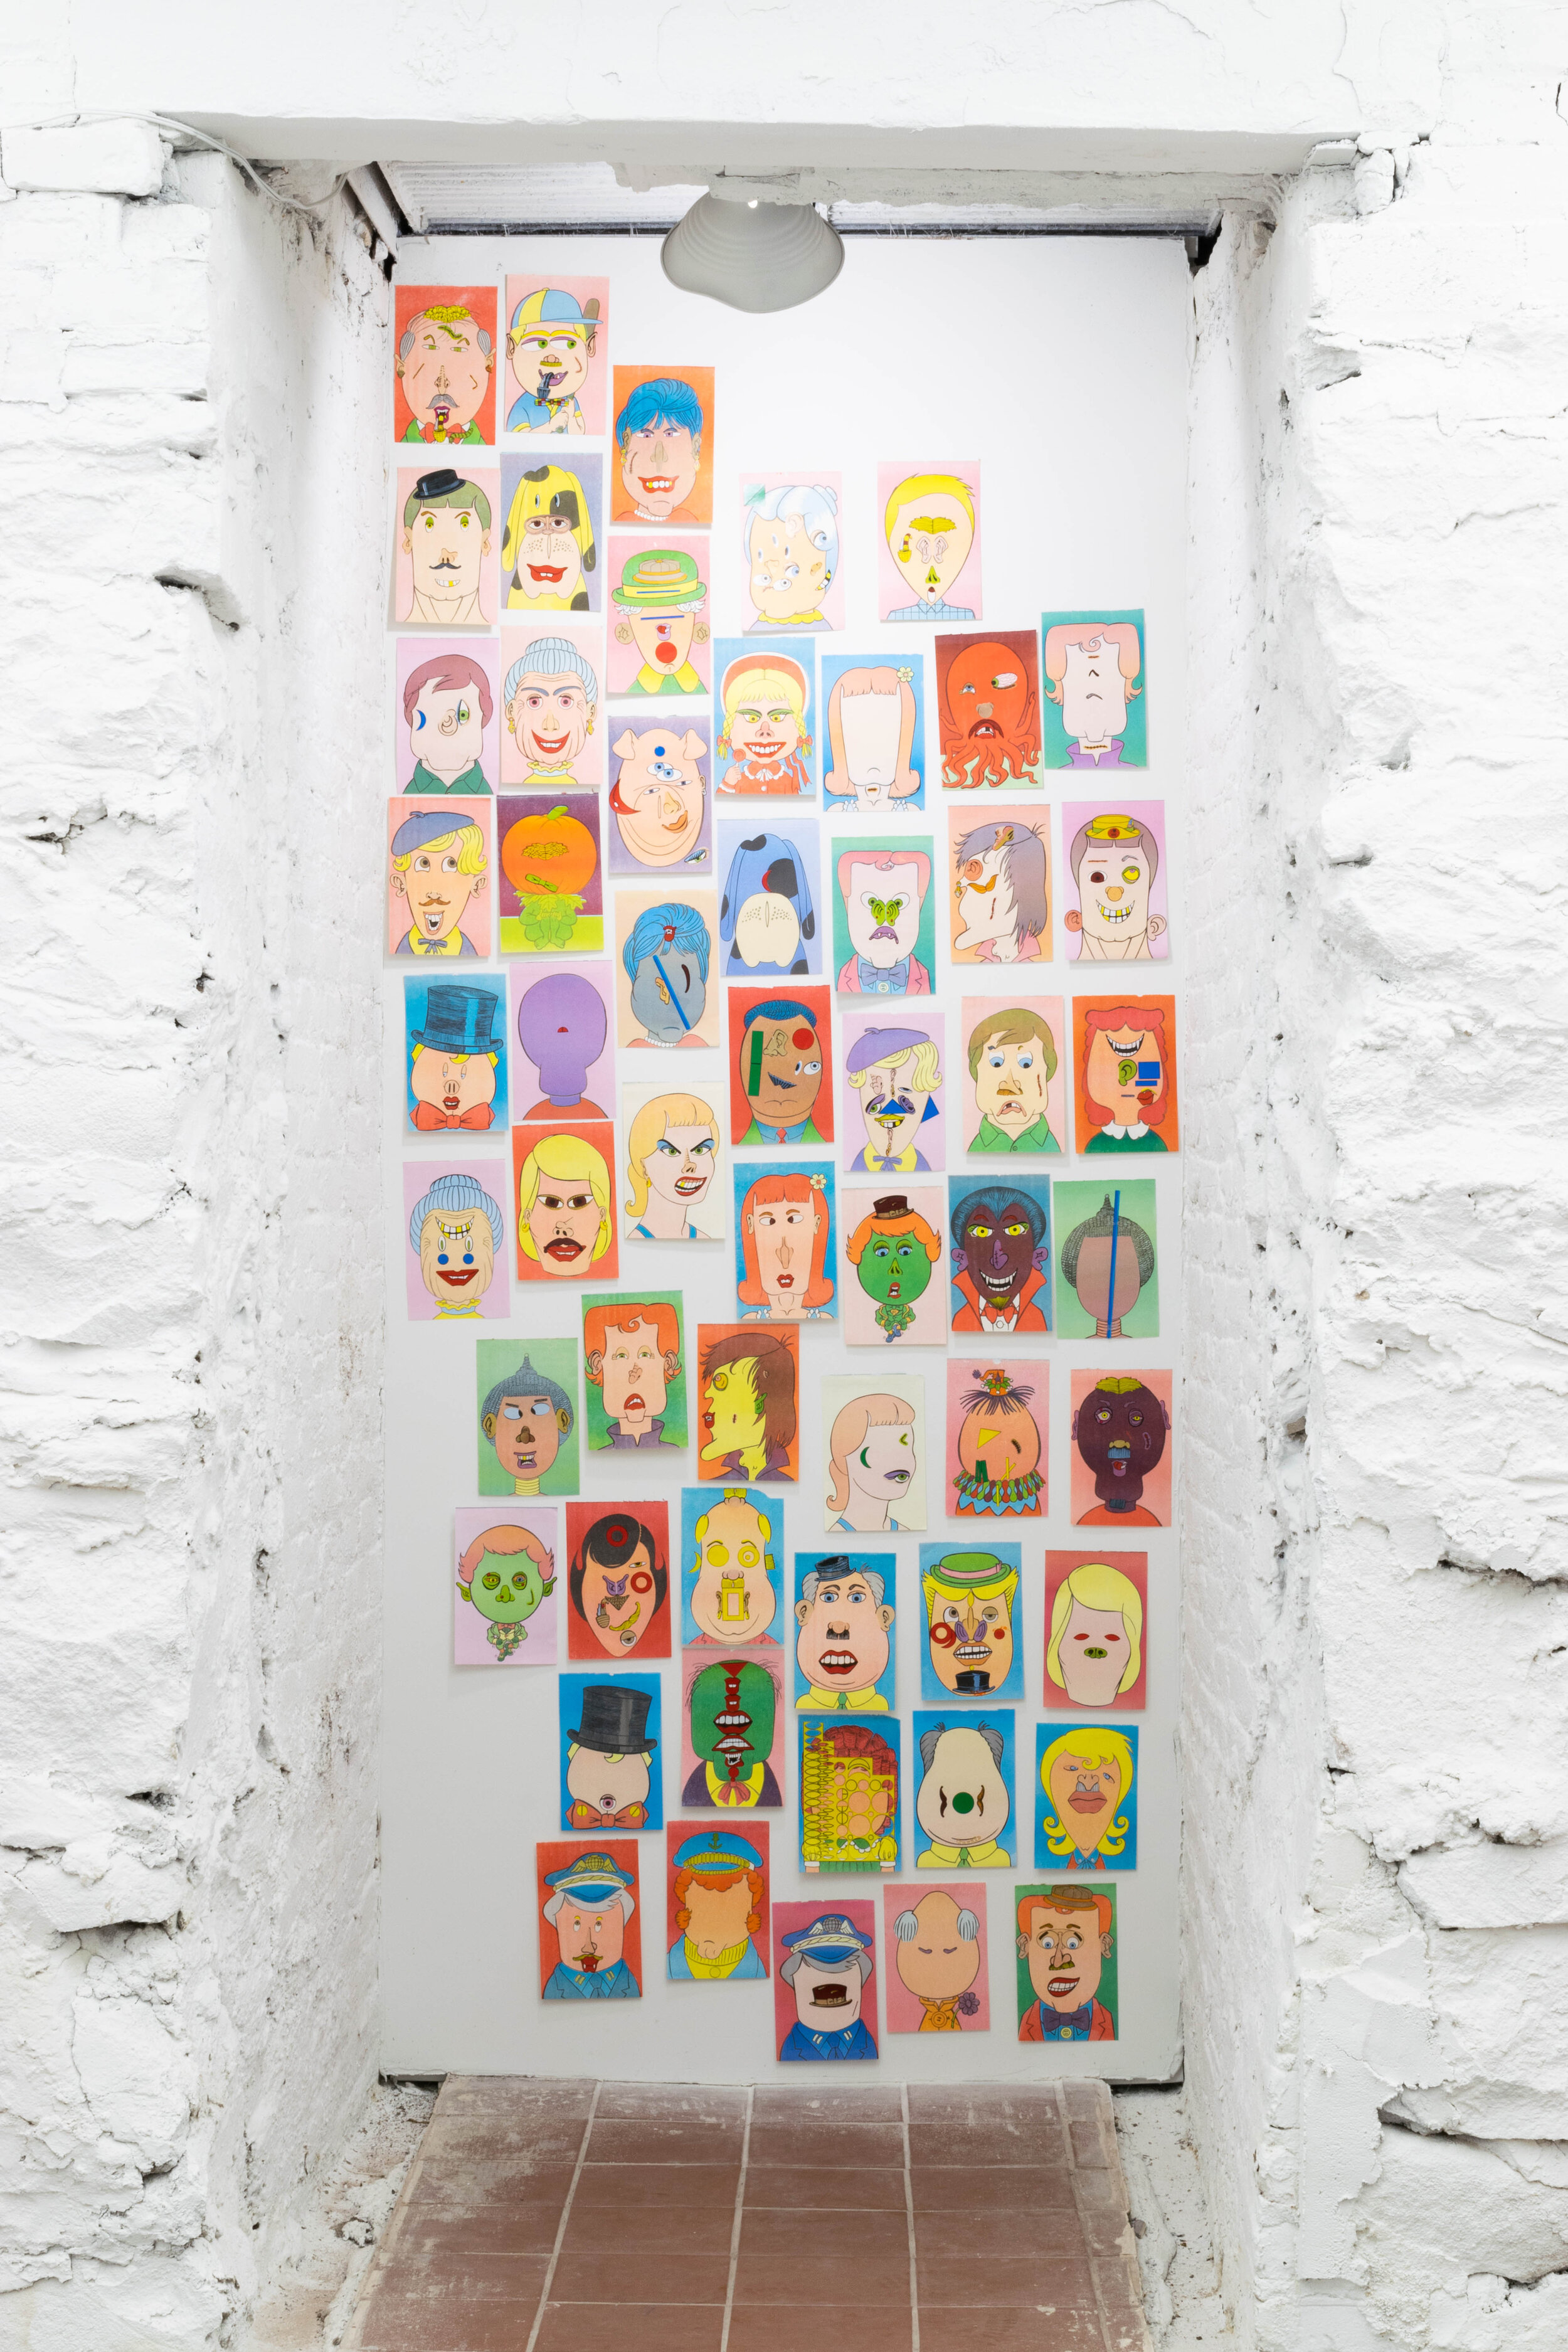 Untitled (faces), 1995/2019, stickers on printed paper